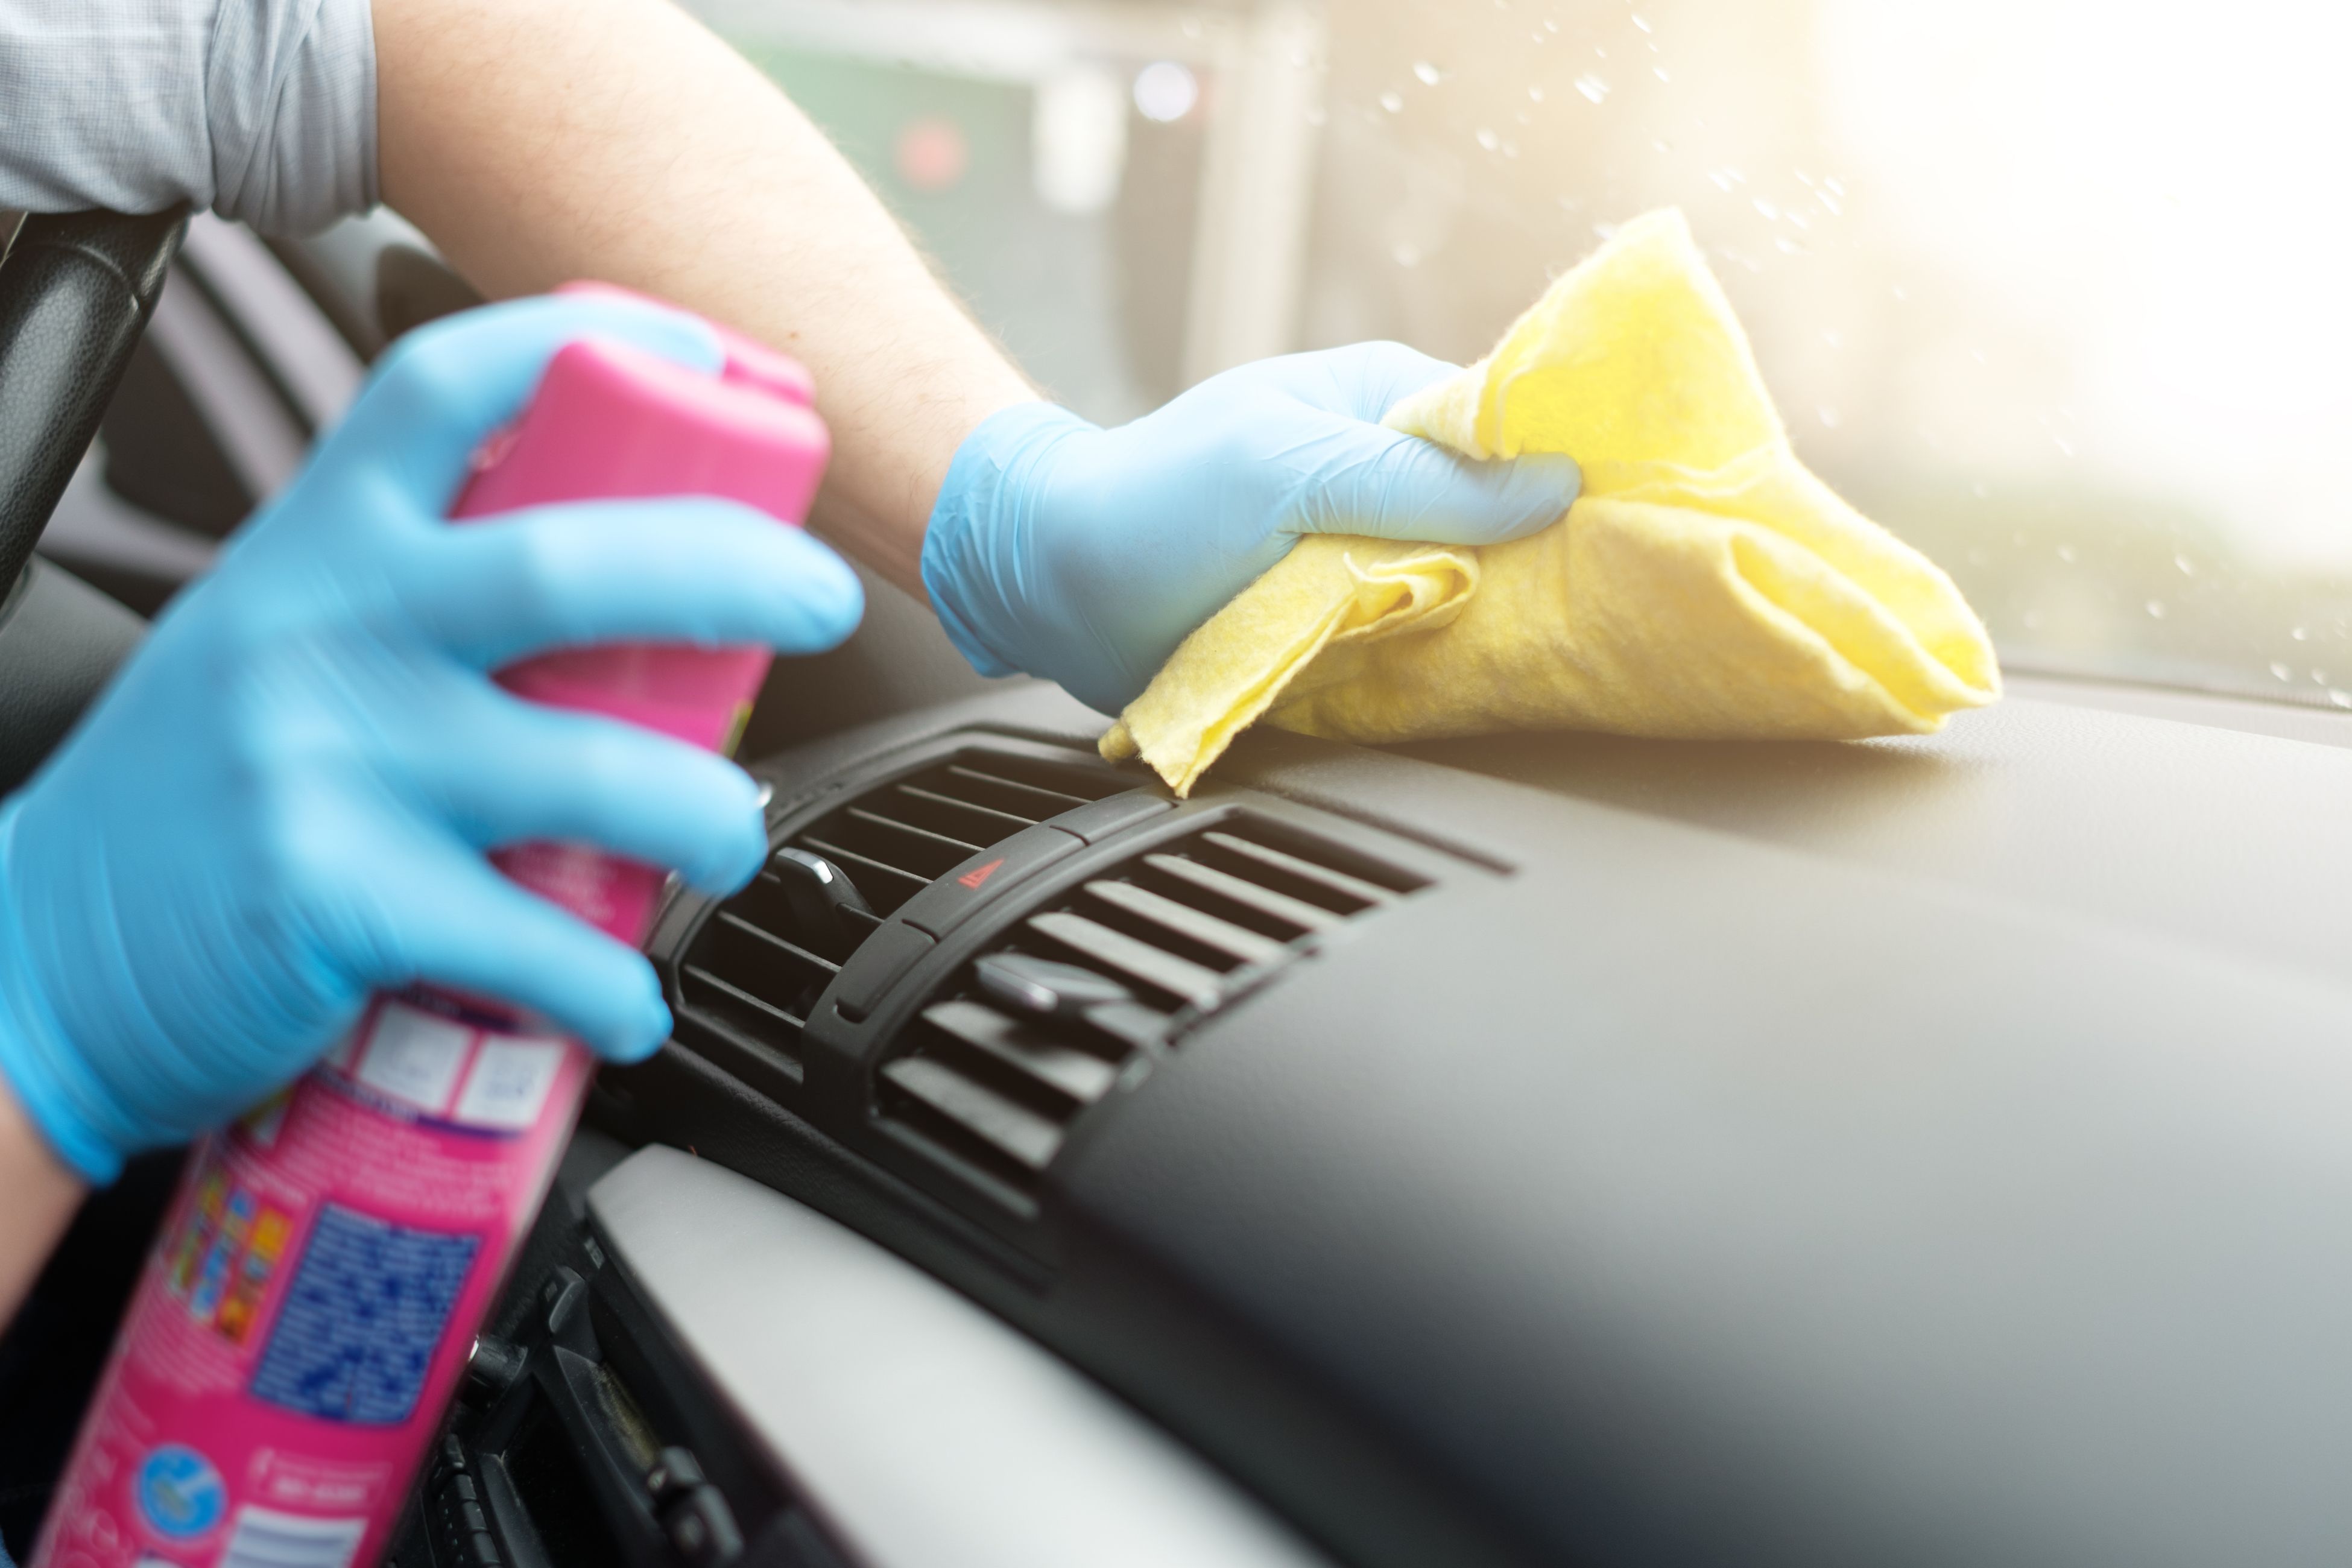 Top 10 tips to keep your car clean to help reduce spread of